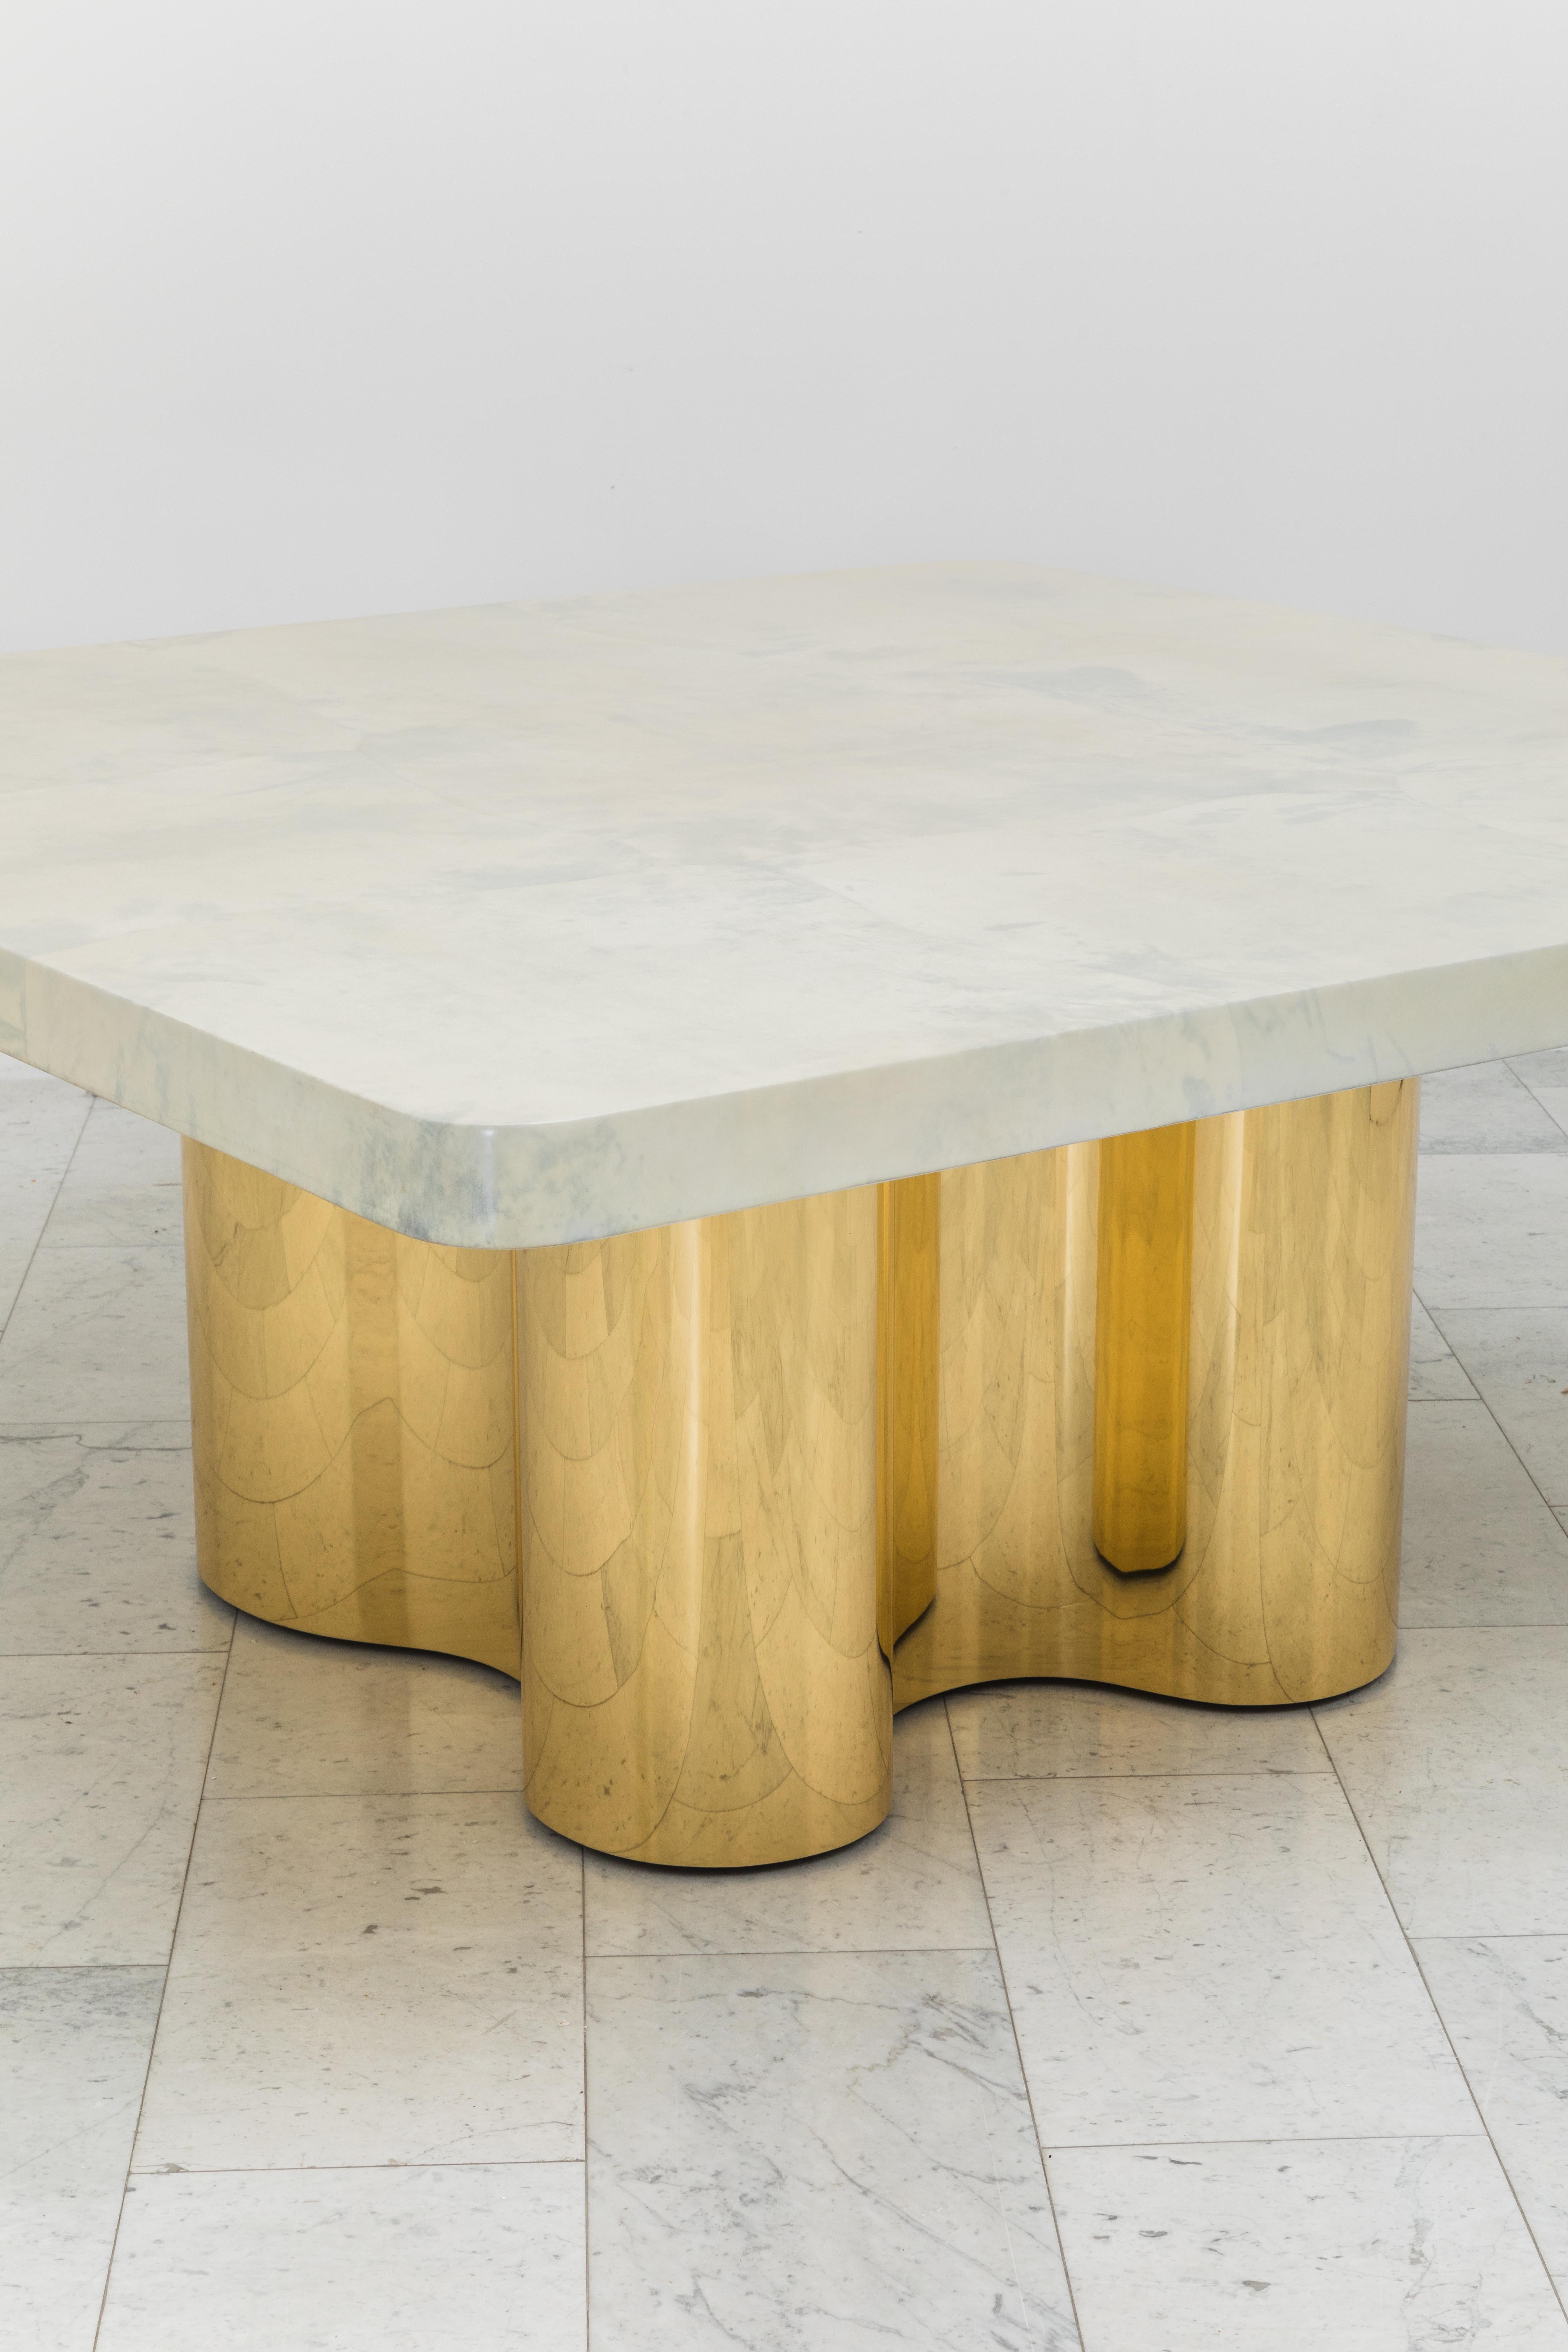 He Freeform dining table with custom goatskin top combines Springer’s Classic 1970s Freeform Table design with a custom lacquered goatskin top. Sleek and elegant, the mirror-polished bronze table bases are set on hidden, recessed casters so they may